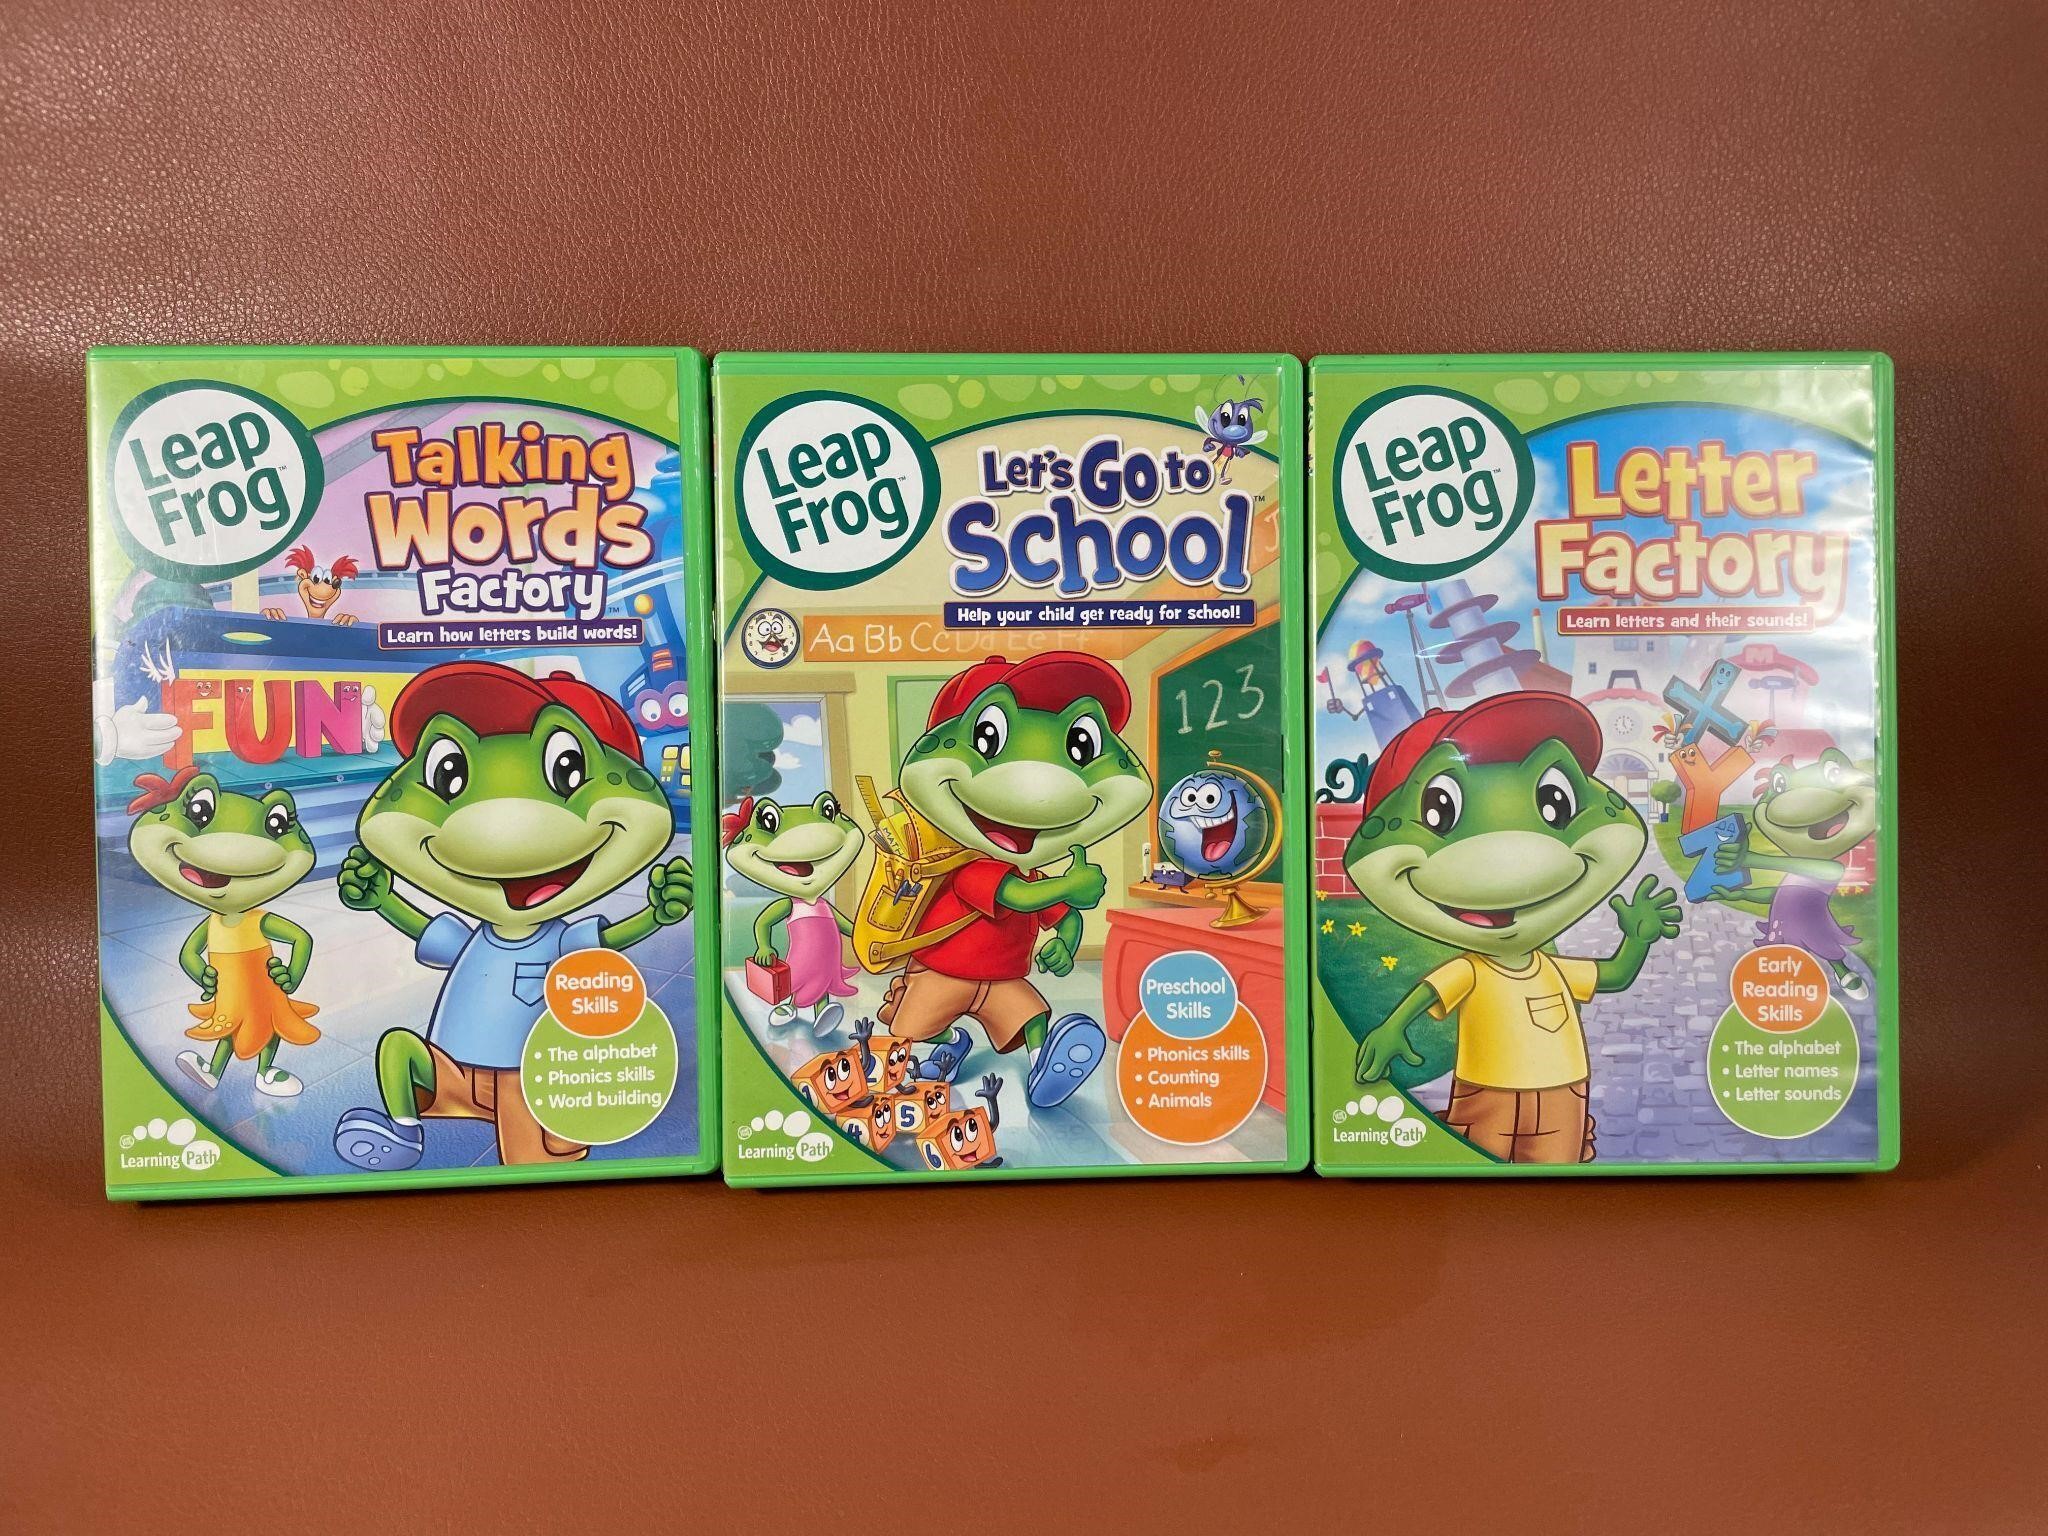 Lot of 3 Leap Frog DVD's